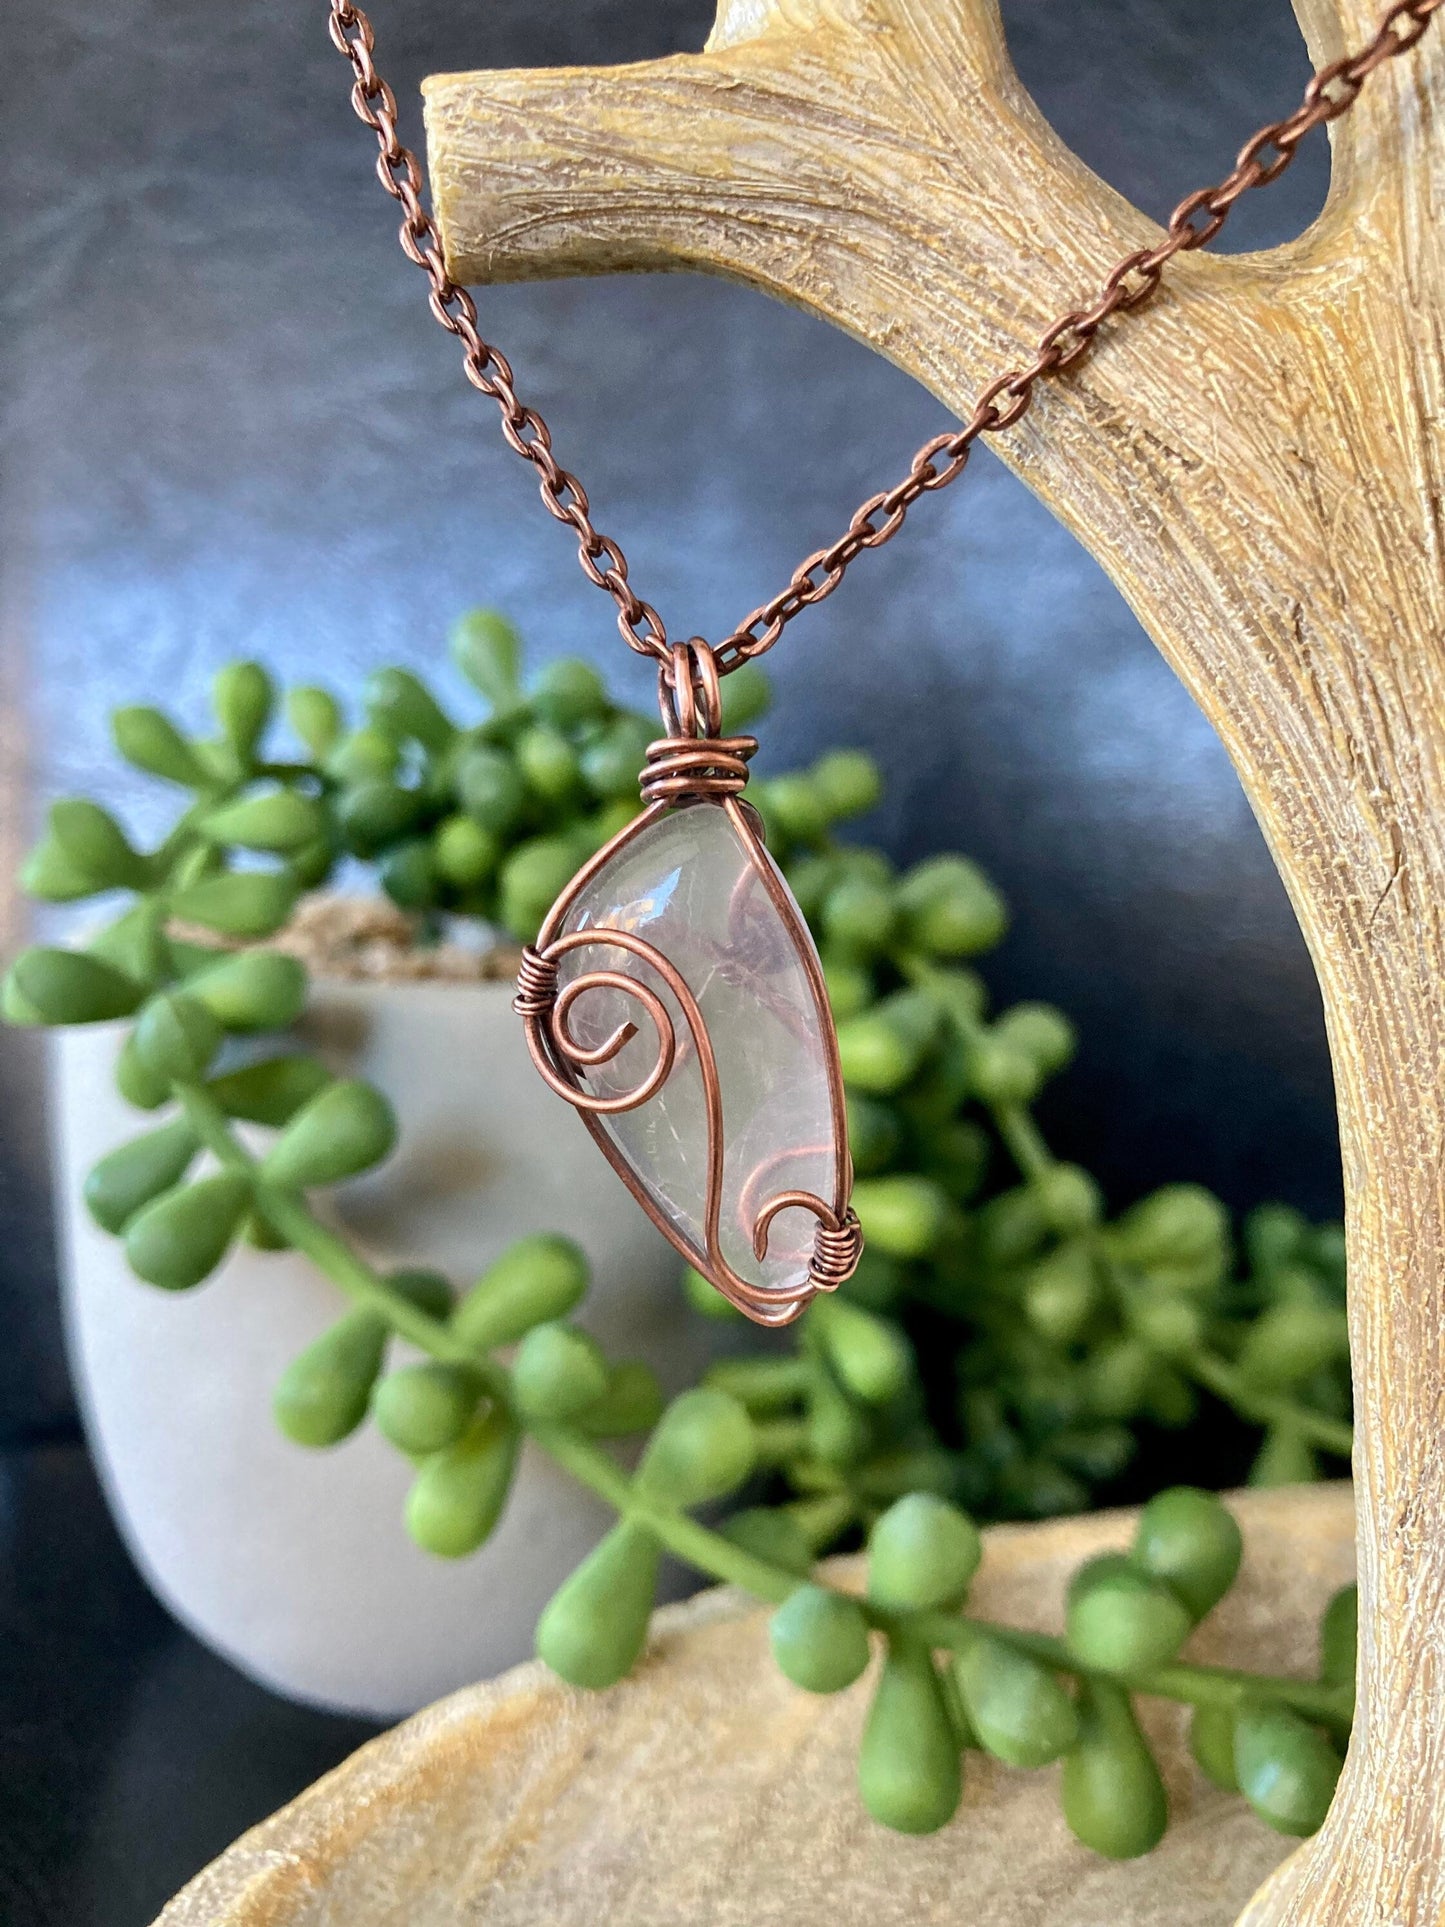 Rose quartz pendant handmade necklace wire wrapped natural stone with 18 inch length chain